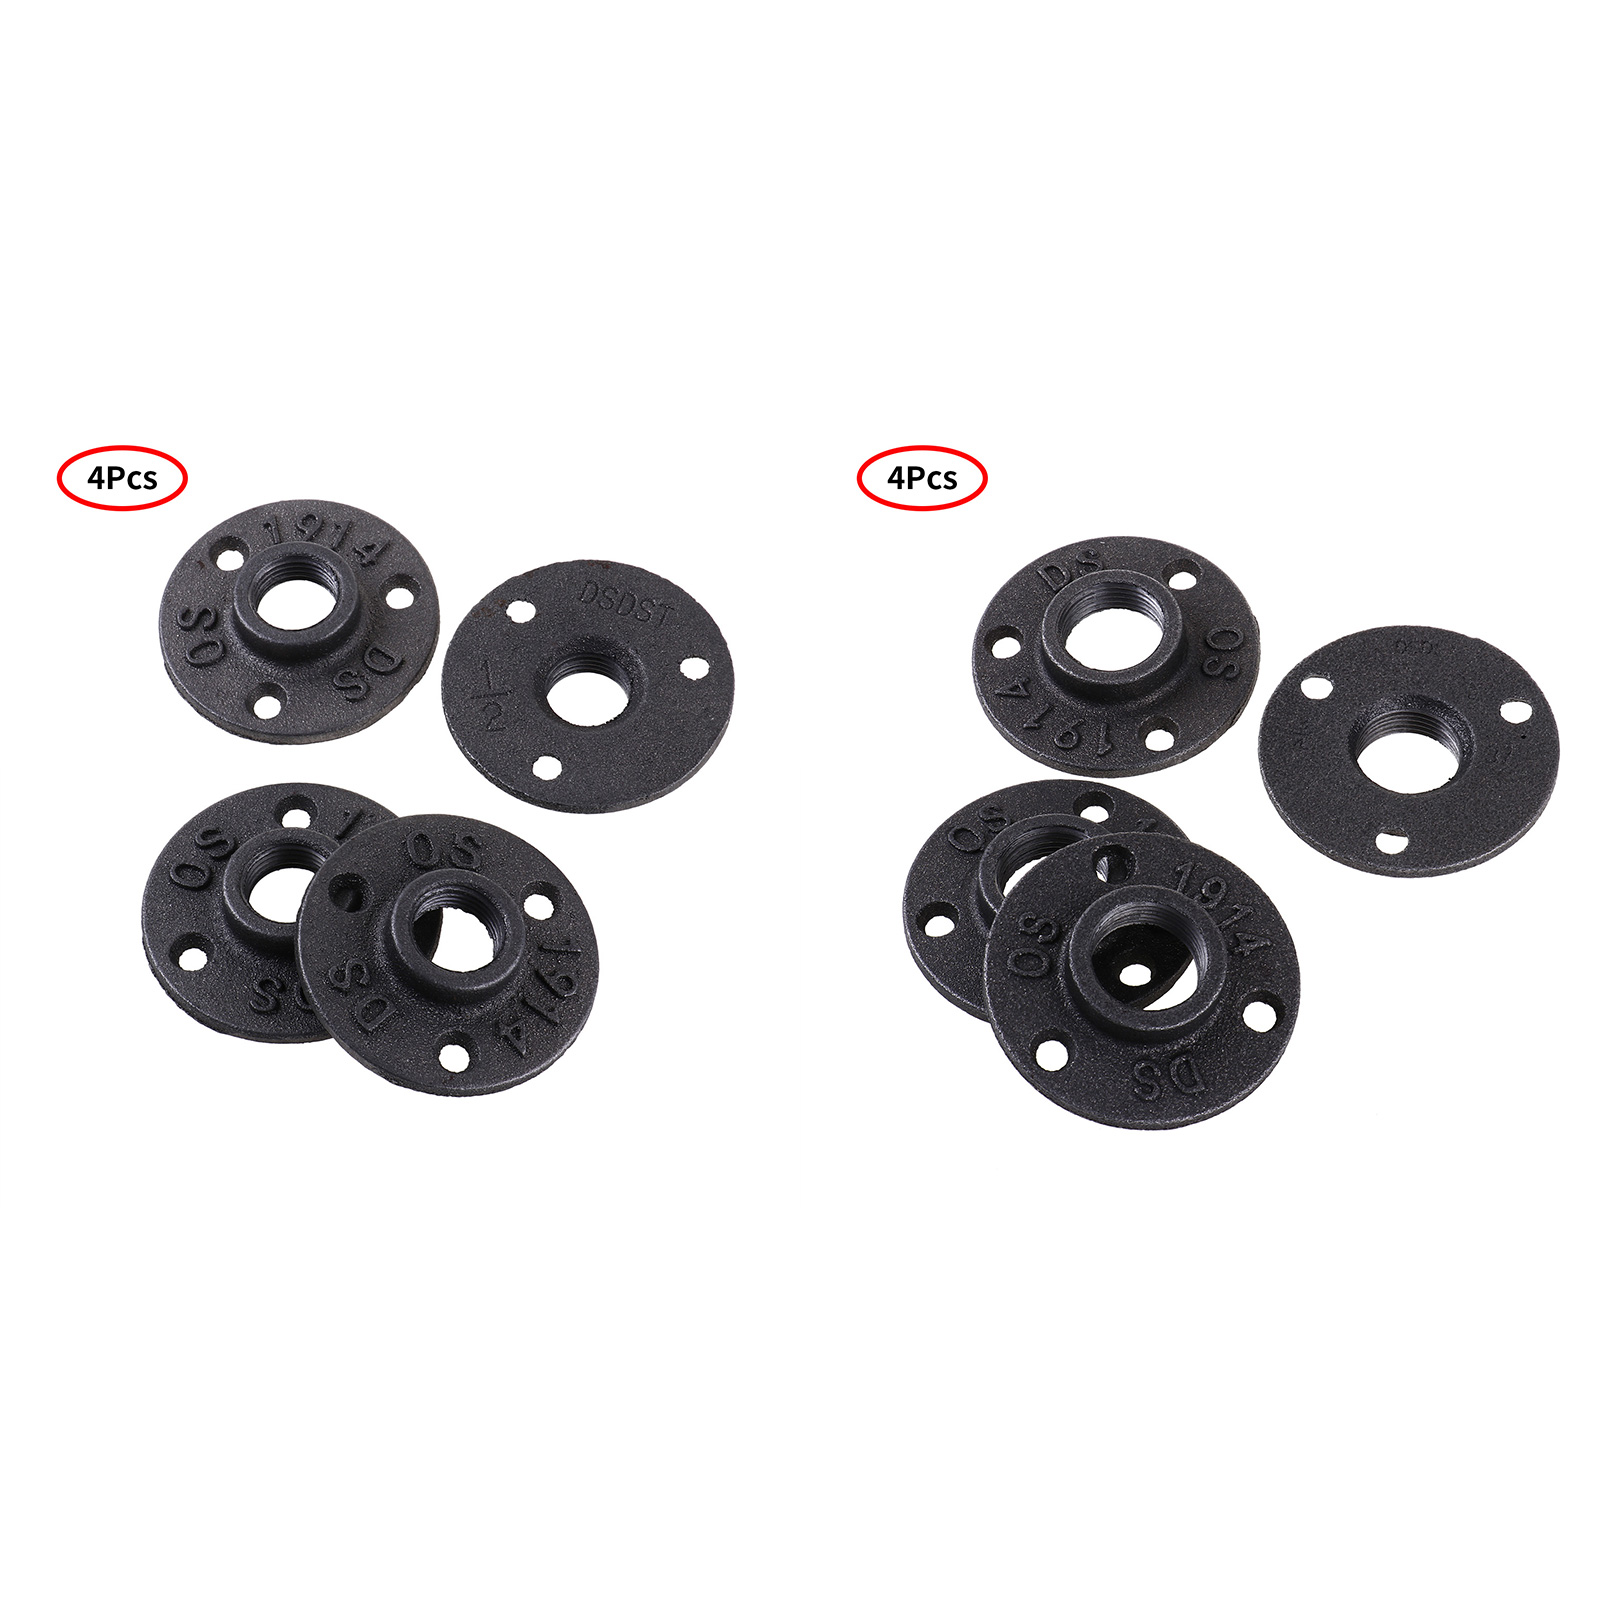 4Pc 3/4 1/2 Iron Flange Base Hardware Kit Threaded Pipe Malleable Flanges 3 Bolt Holes Screw Cast Pipe Fittings Home Accessories